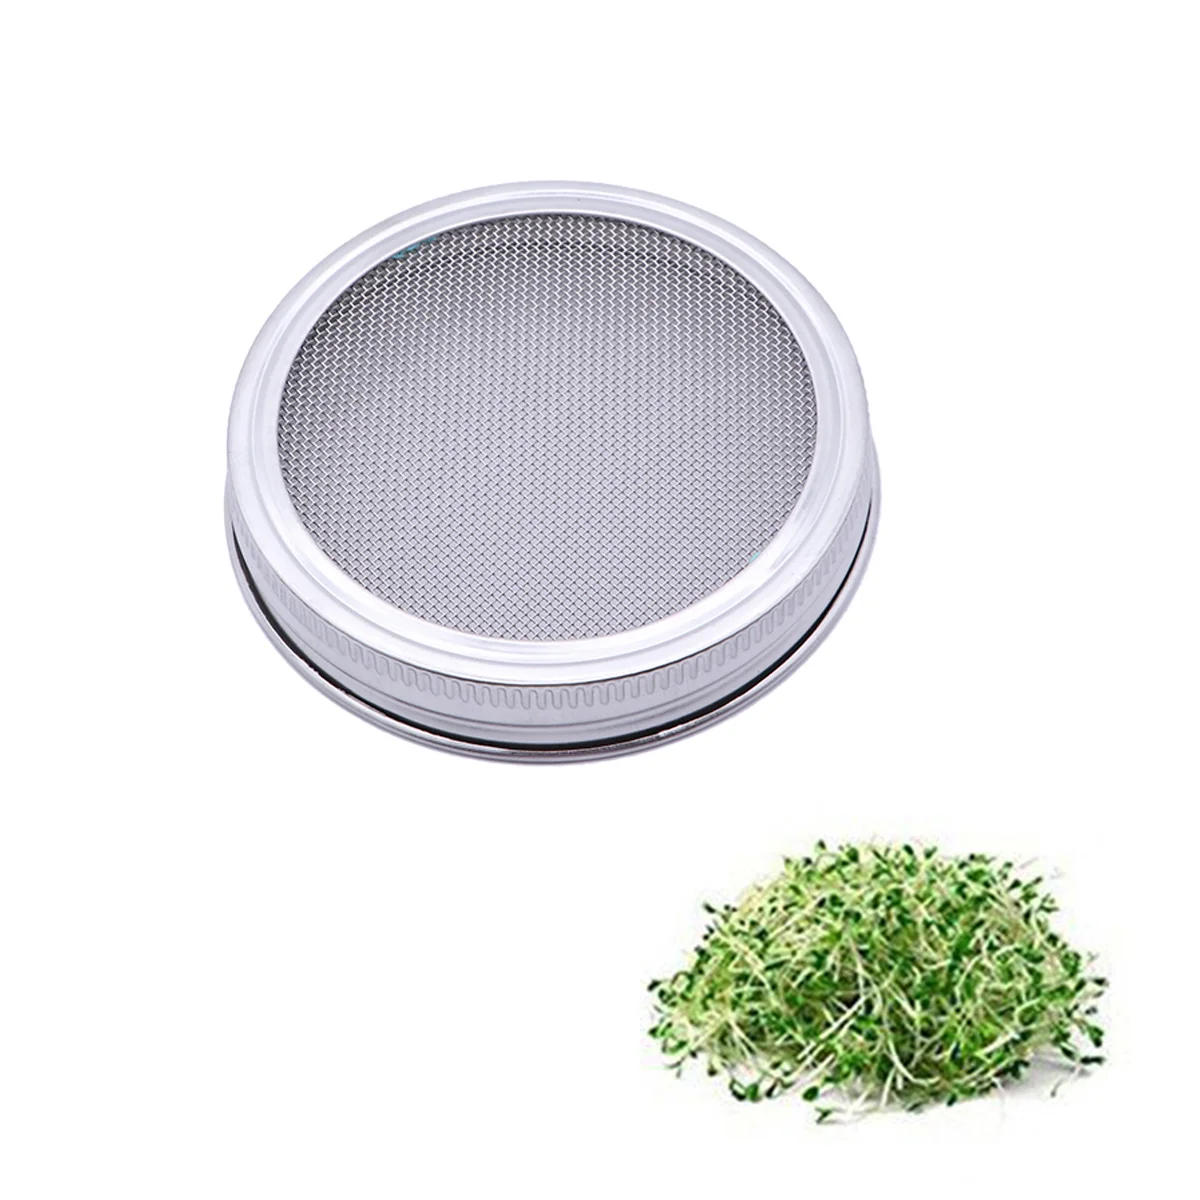 

Sprouting Lid Lids Jar Mason Screen Canning Jars Mesh Mouth Strainer Sprouts Germination Sprouter Bean Wide Steel Regular